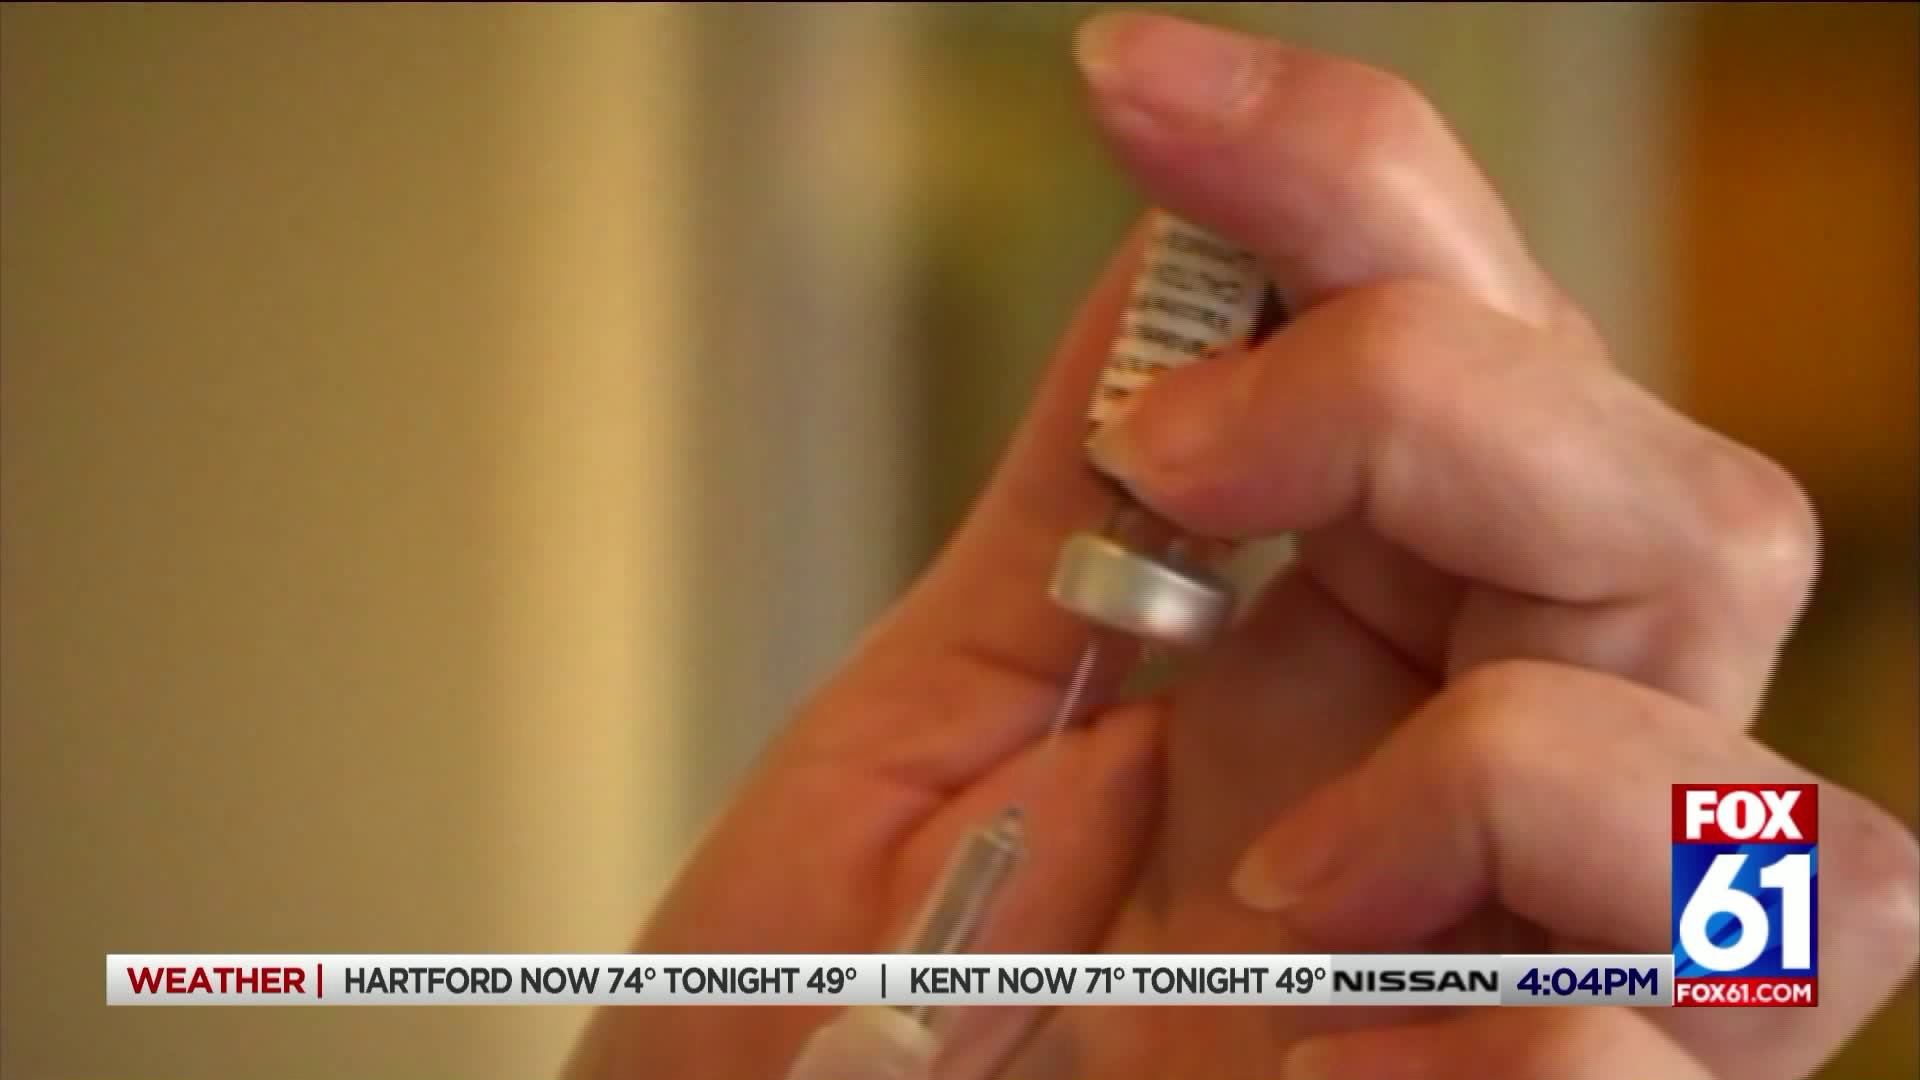 DPH Commissioner backs ban on vaccine religious exemption